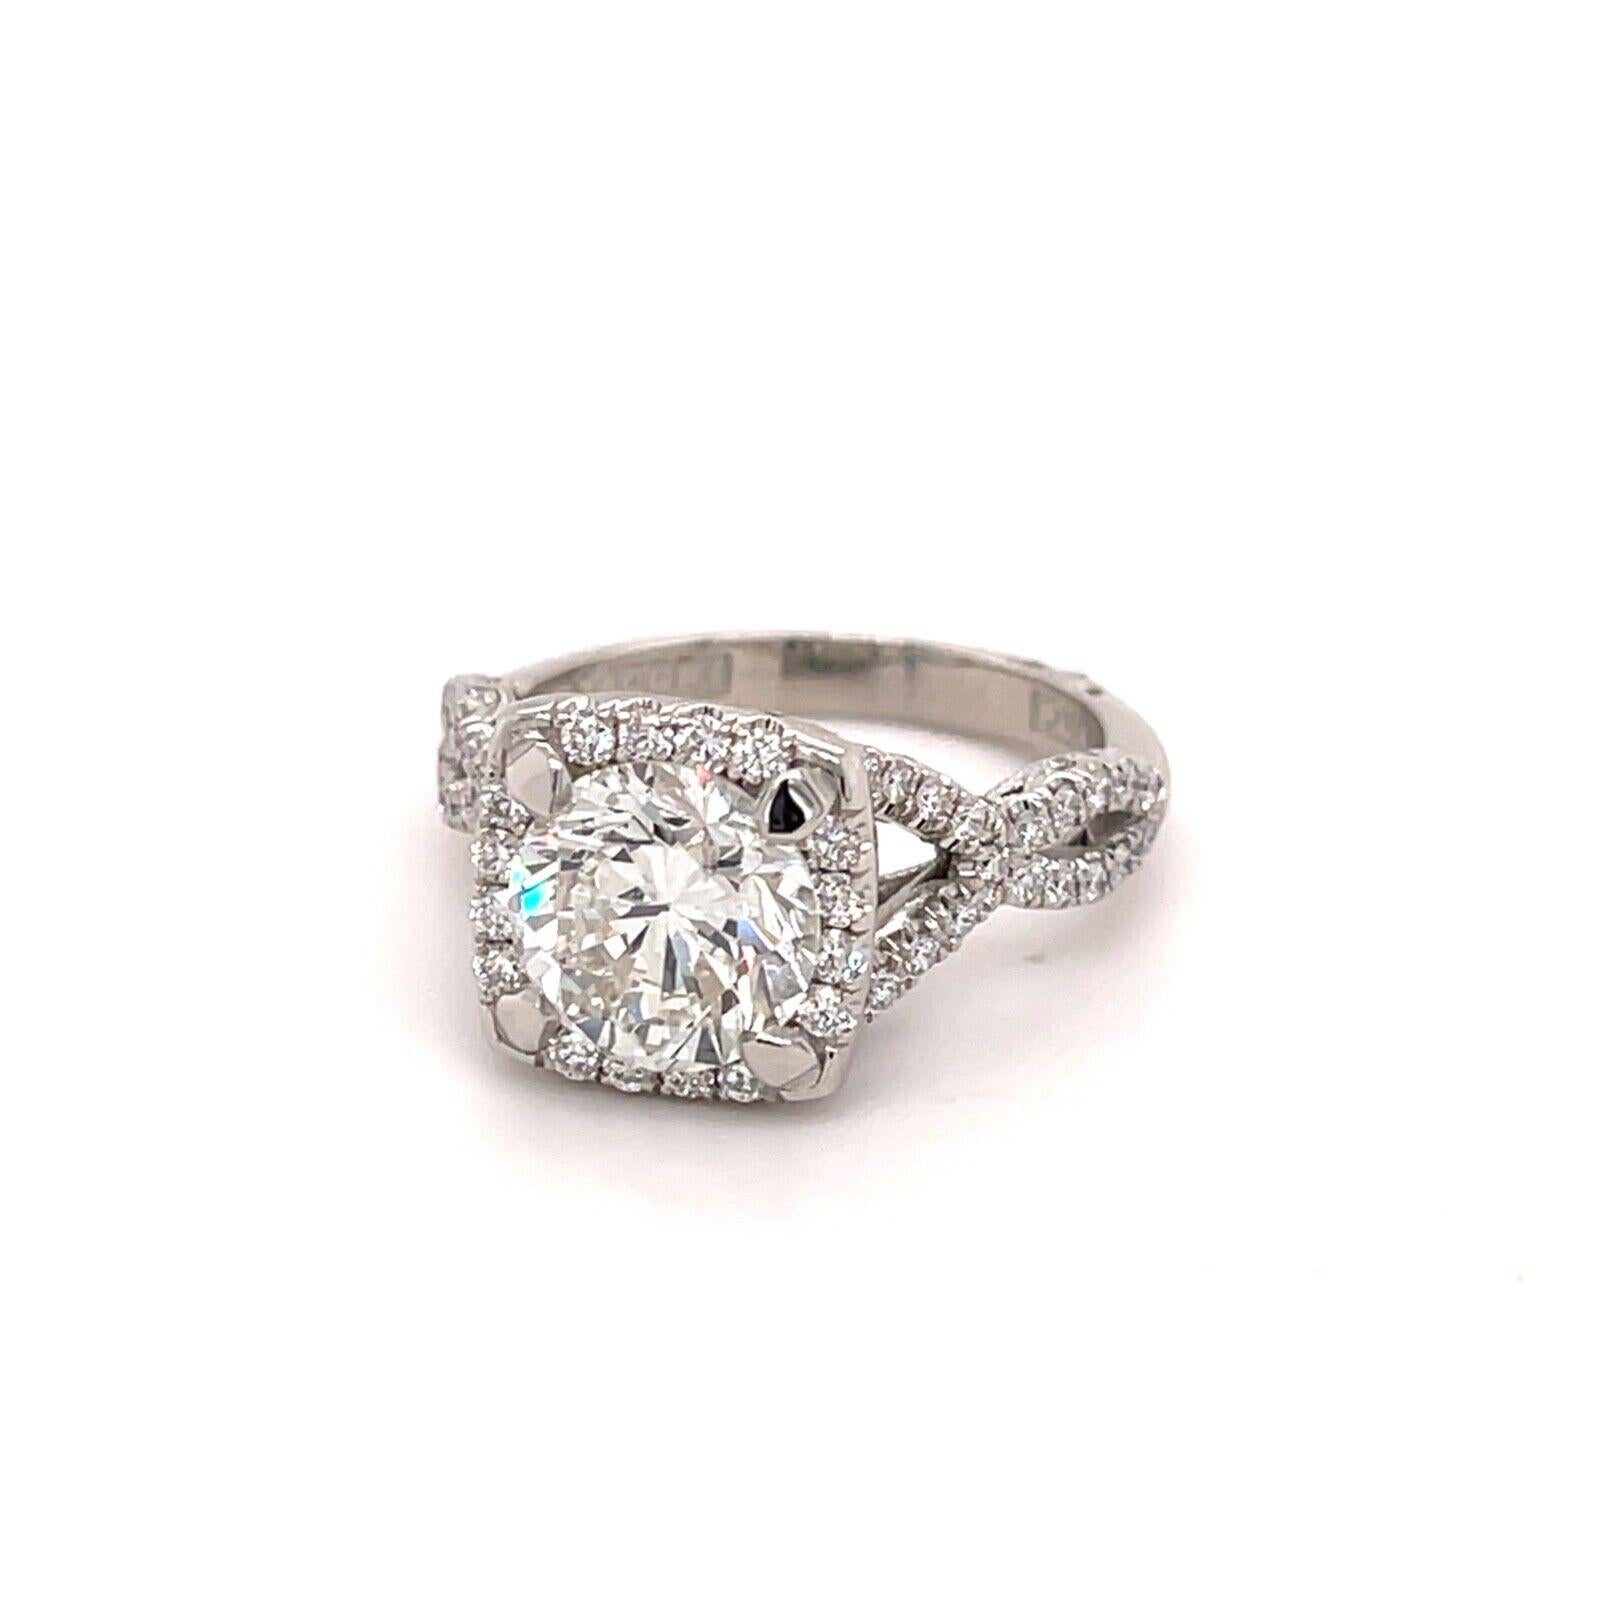 Tacori Platinum Round Center With Round Diamond Ring  

Size 6.75

8.1 Grams

 Round Brilliant Cut White Diamonds .75 Carats Total Weight

Clarity: Si1 Color: H

Center Round Brilliant Cut Diamond 2.37 Carats

Color: H Clarity: Si2



This is a